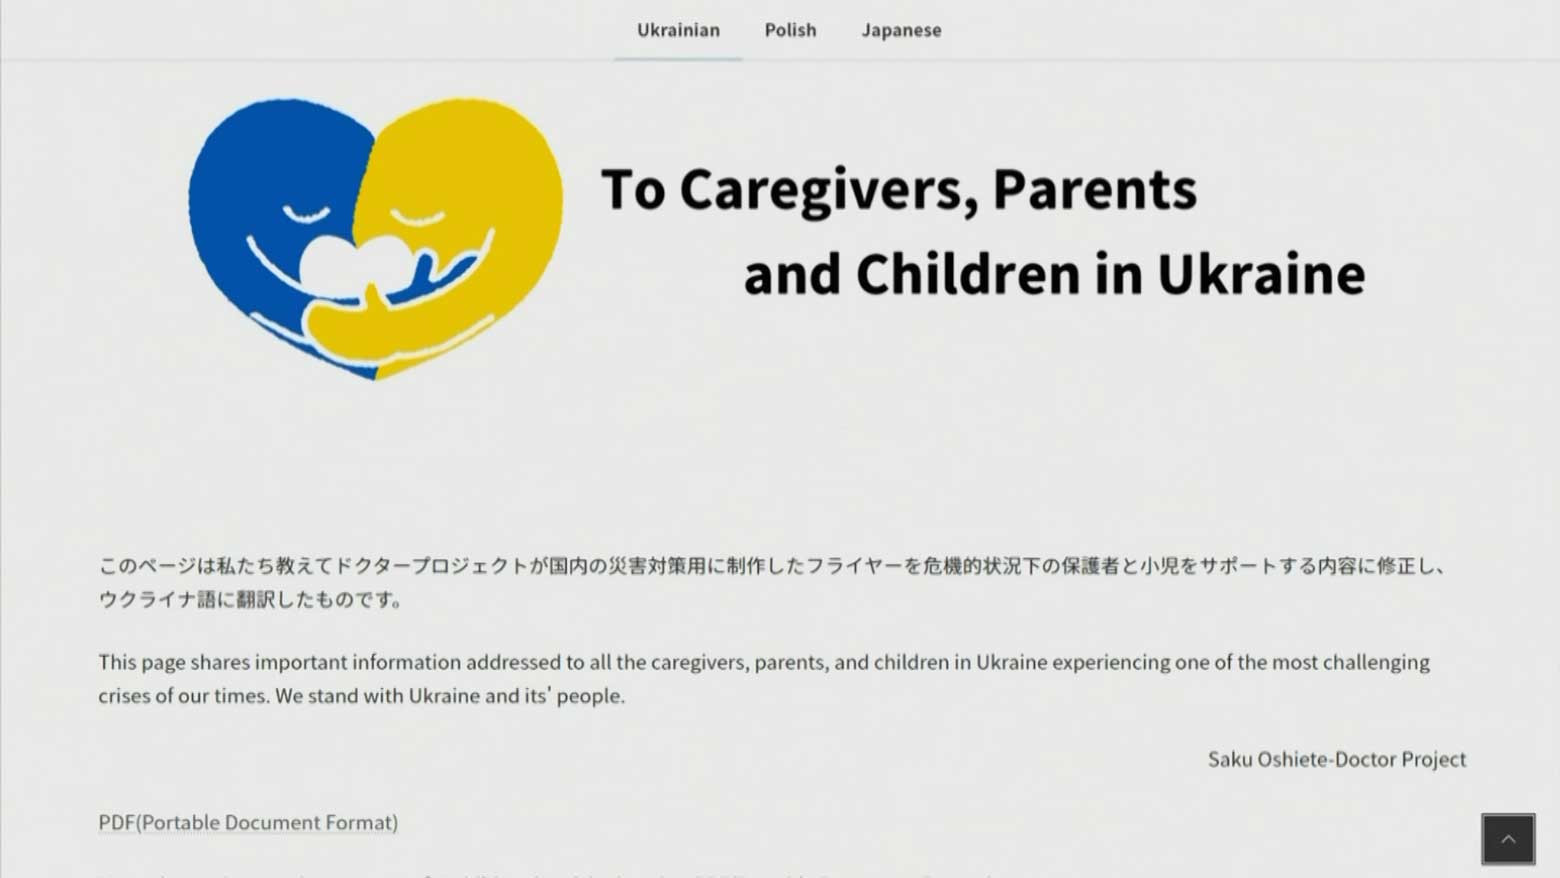 Japanese health care team offers advice for displaced Ukrainian families